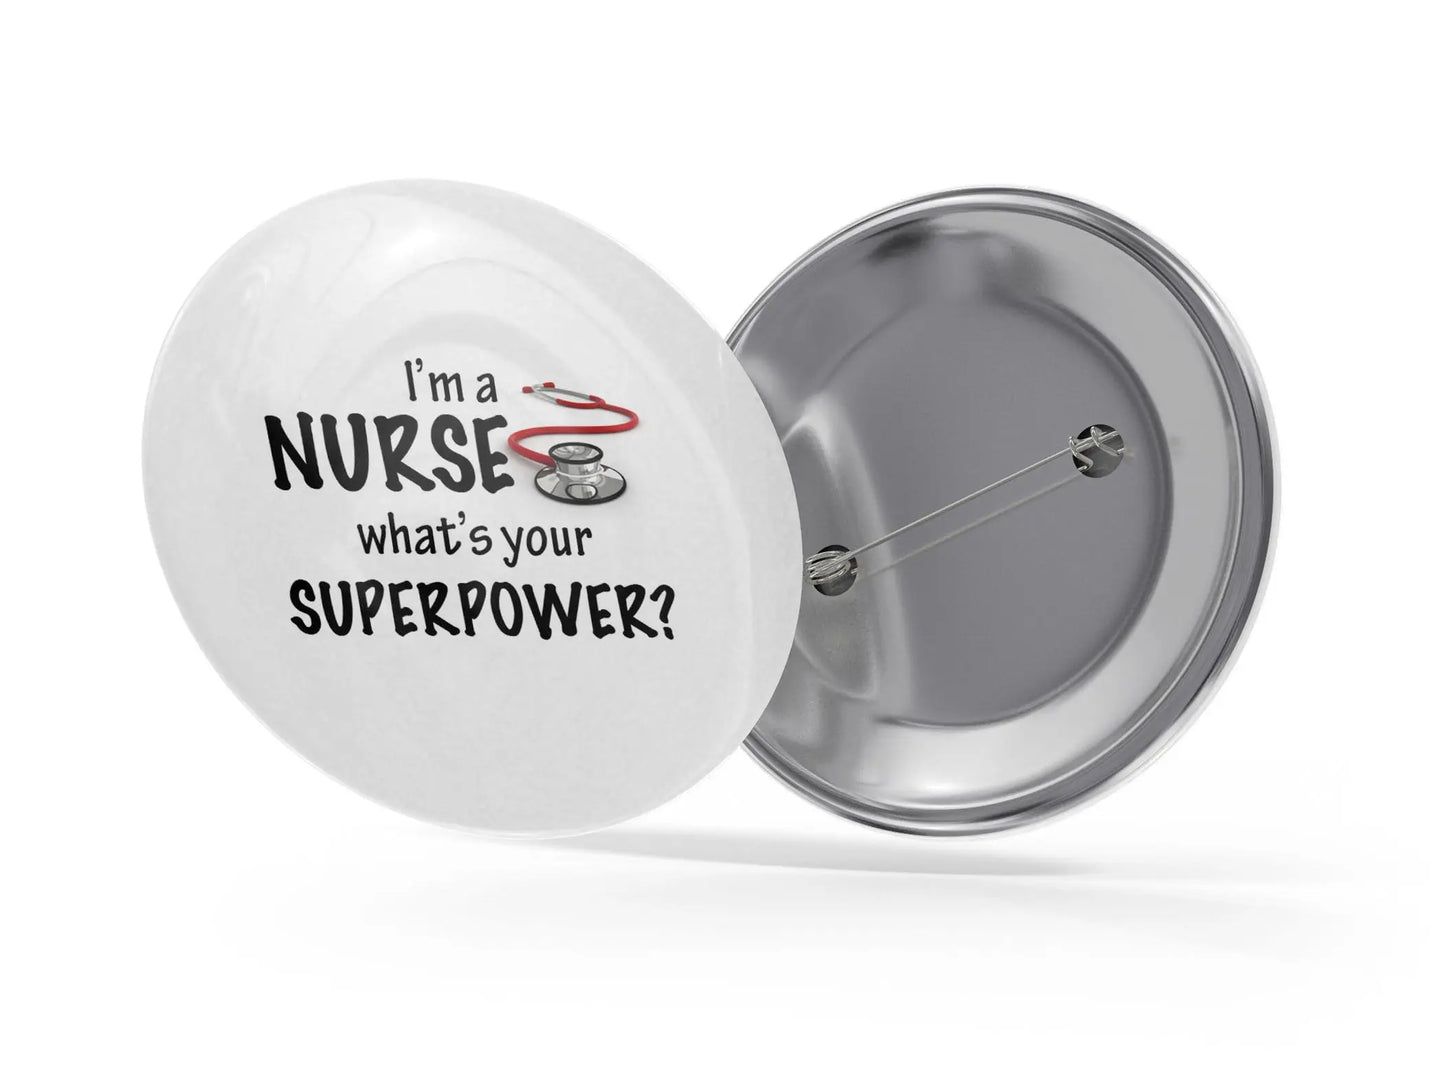 Nurse Superpower - Medical Nurse Badge - Health Personalized Giveaways - Profession Career Button Pins - 10 pieces - Busybee Creates